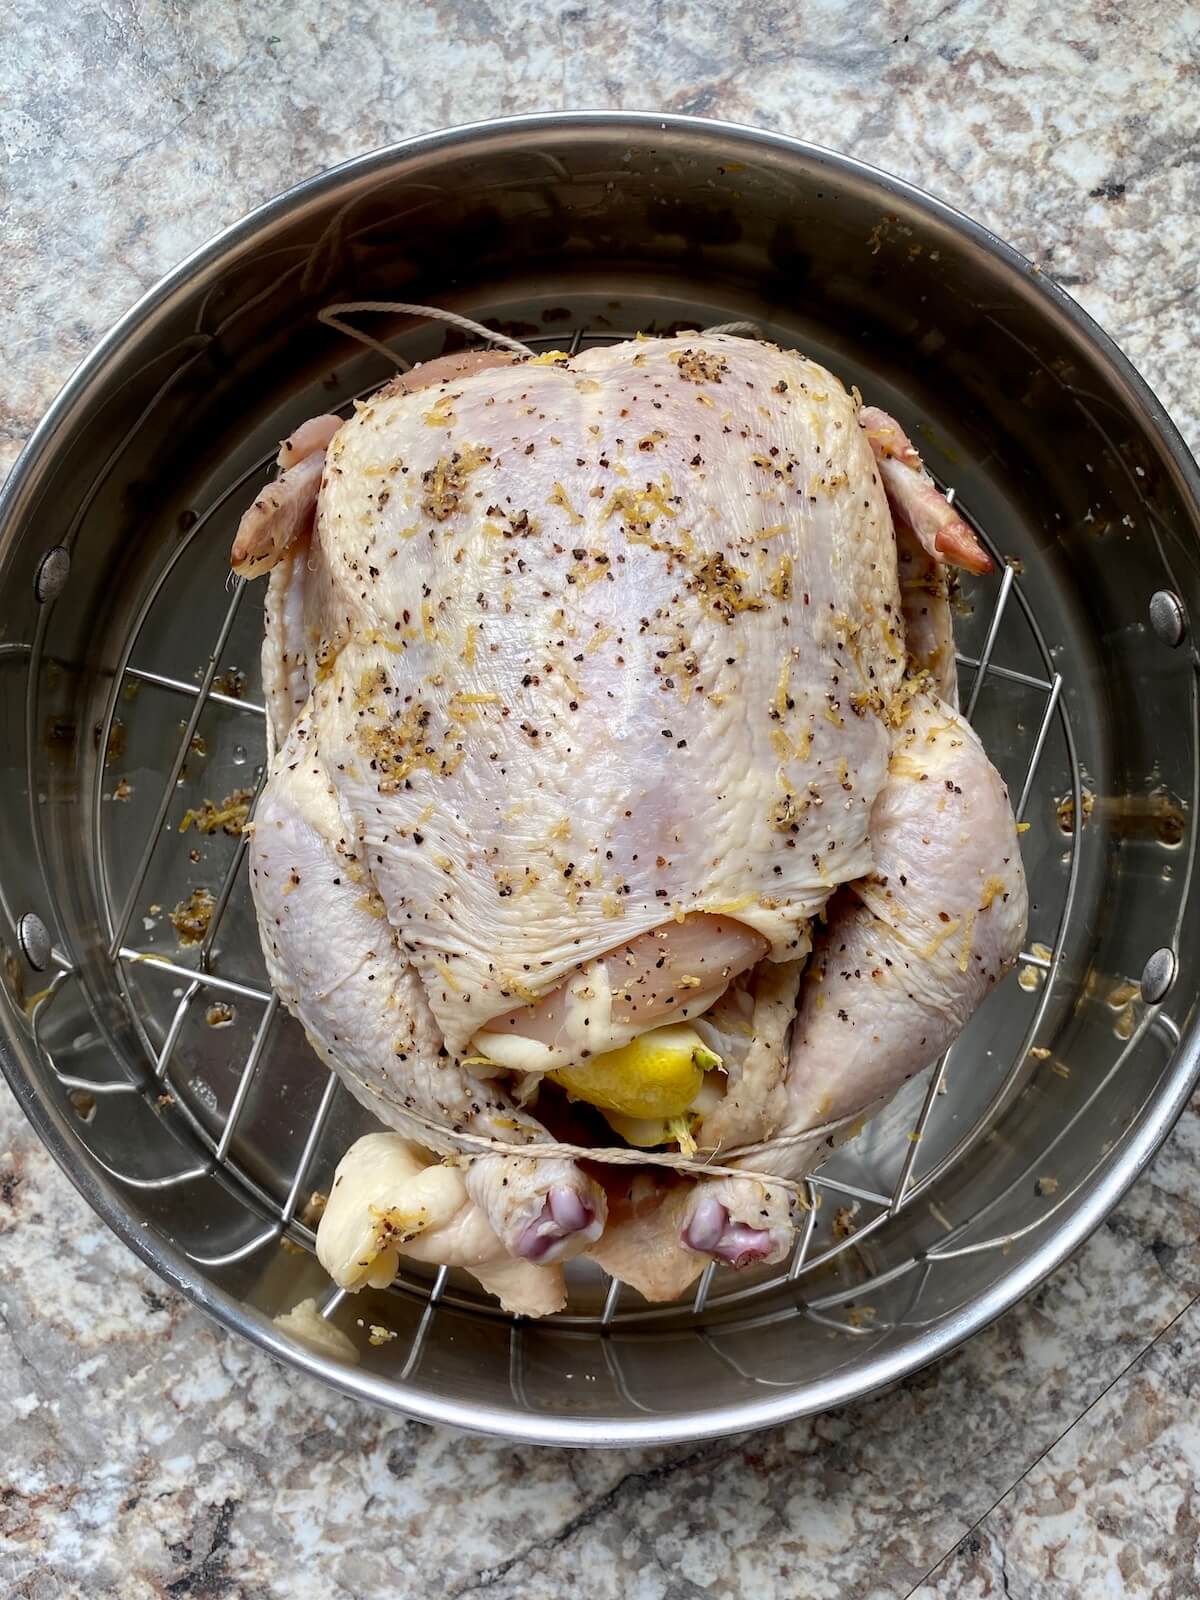 A dry brined chicken stuffed with aromatics and trussed before roasting.